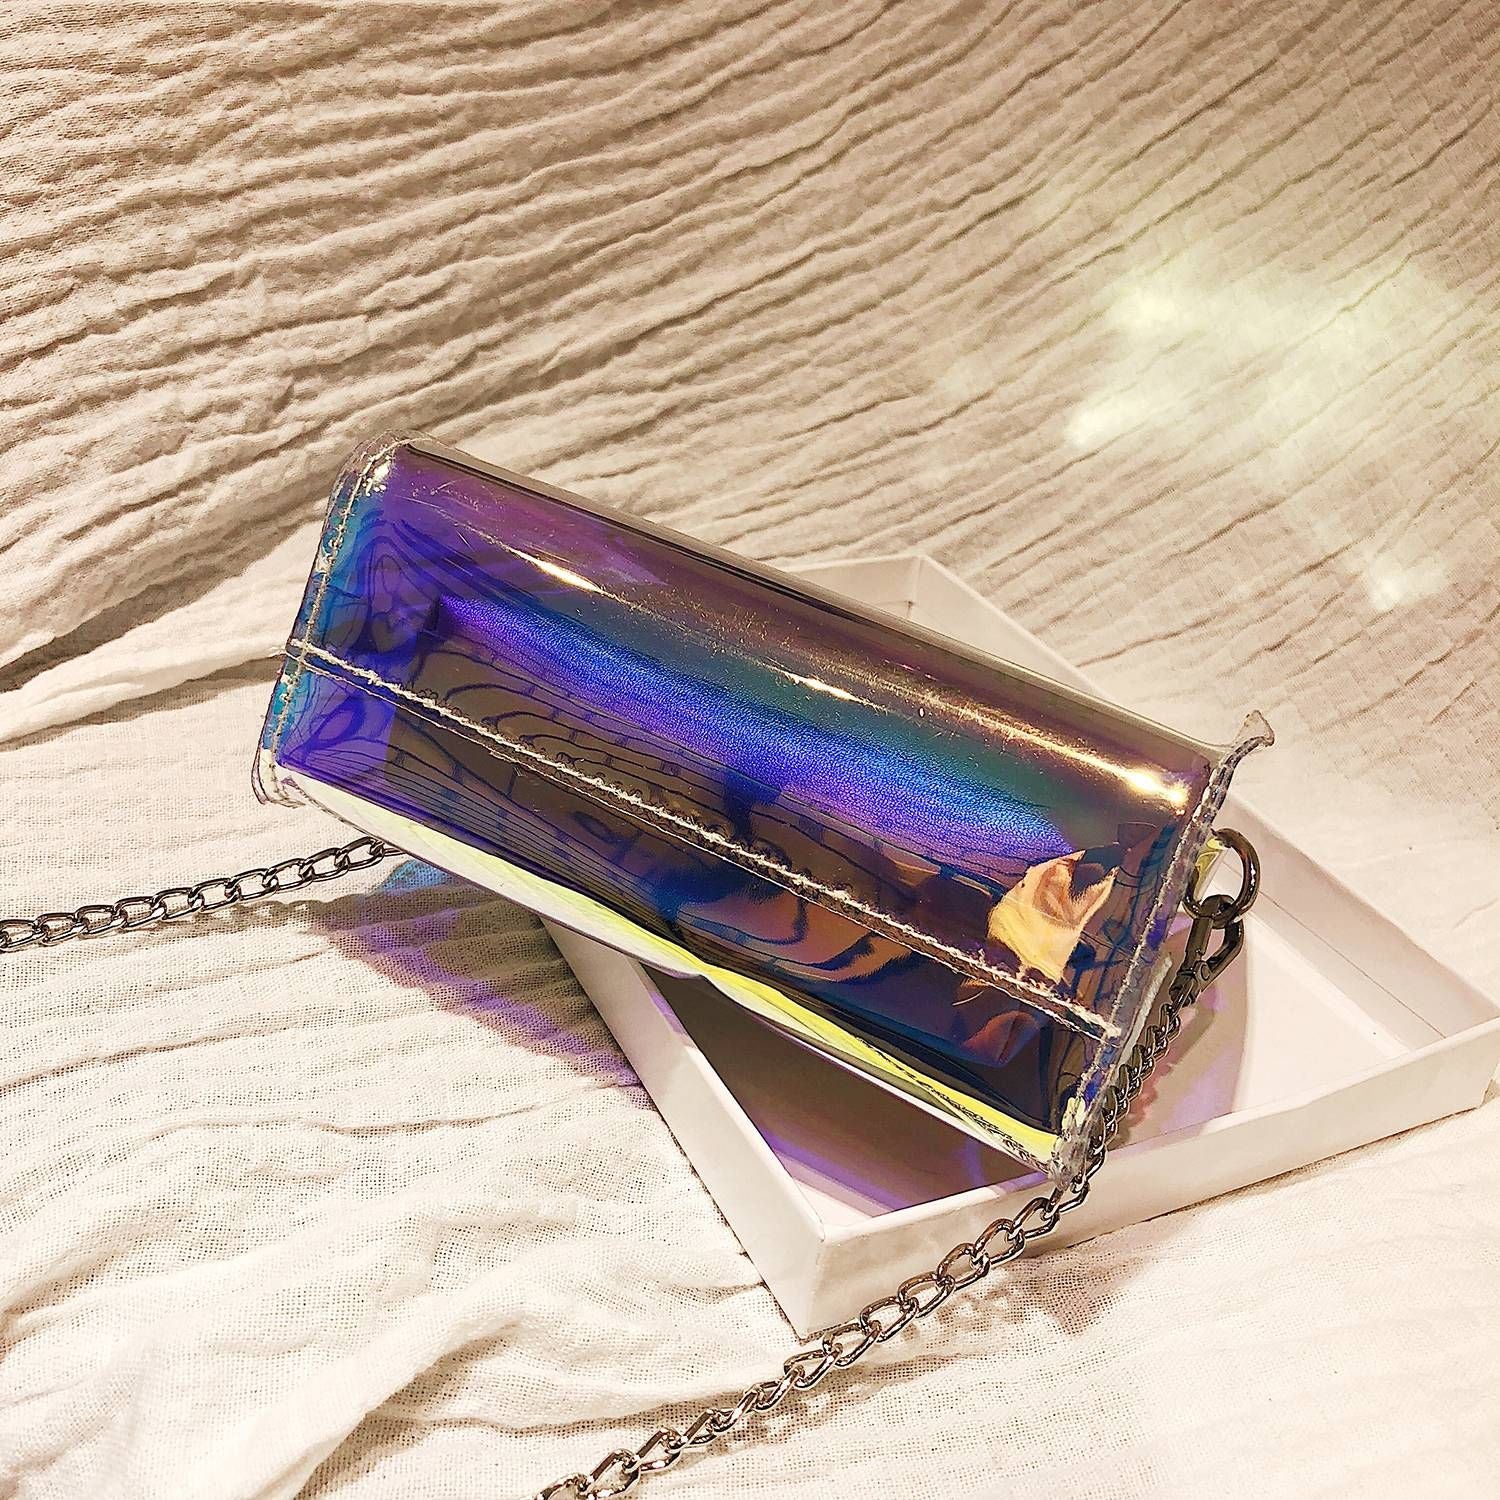 Laser-Jelly Handle Tote Women Transparent Bag Clear PVC Jelly Small Tote Messenger Bags Female Crossbody Shoulder Bags - ebowsos